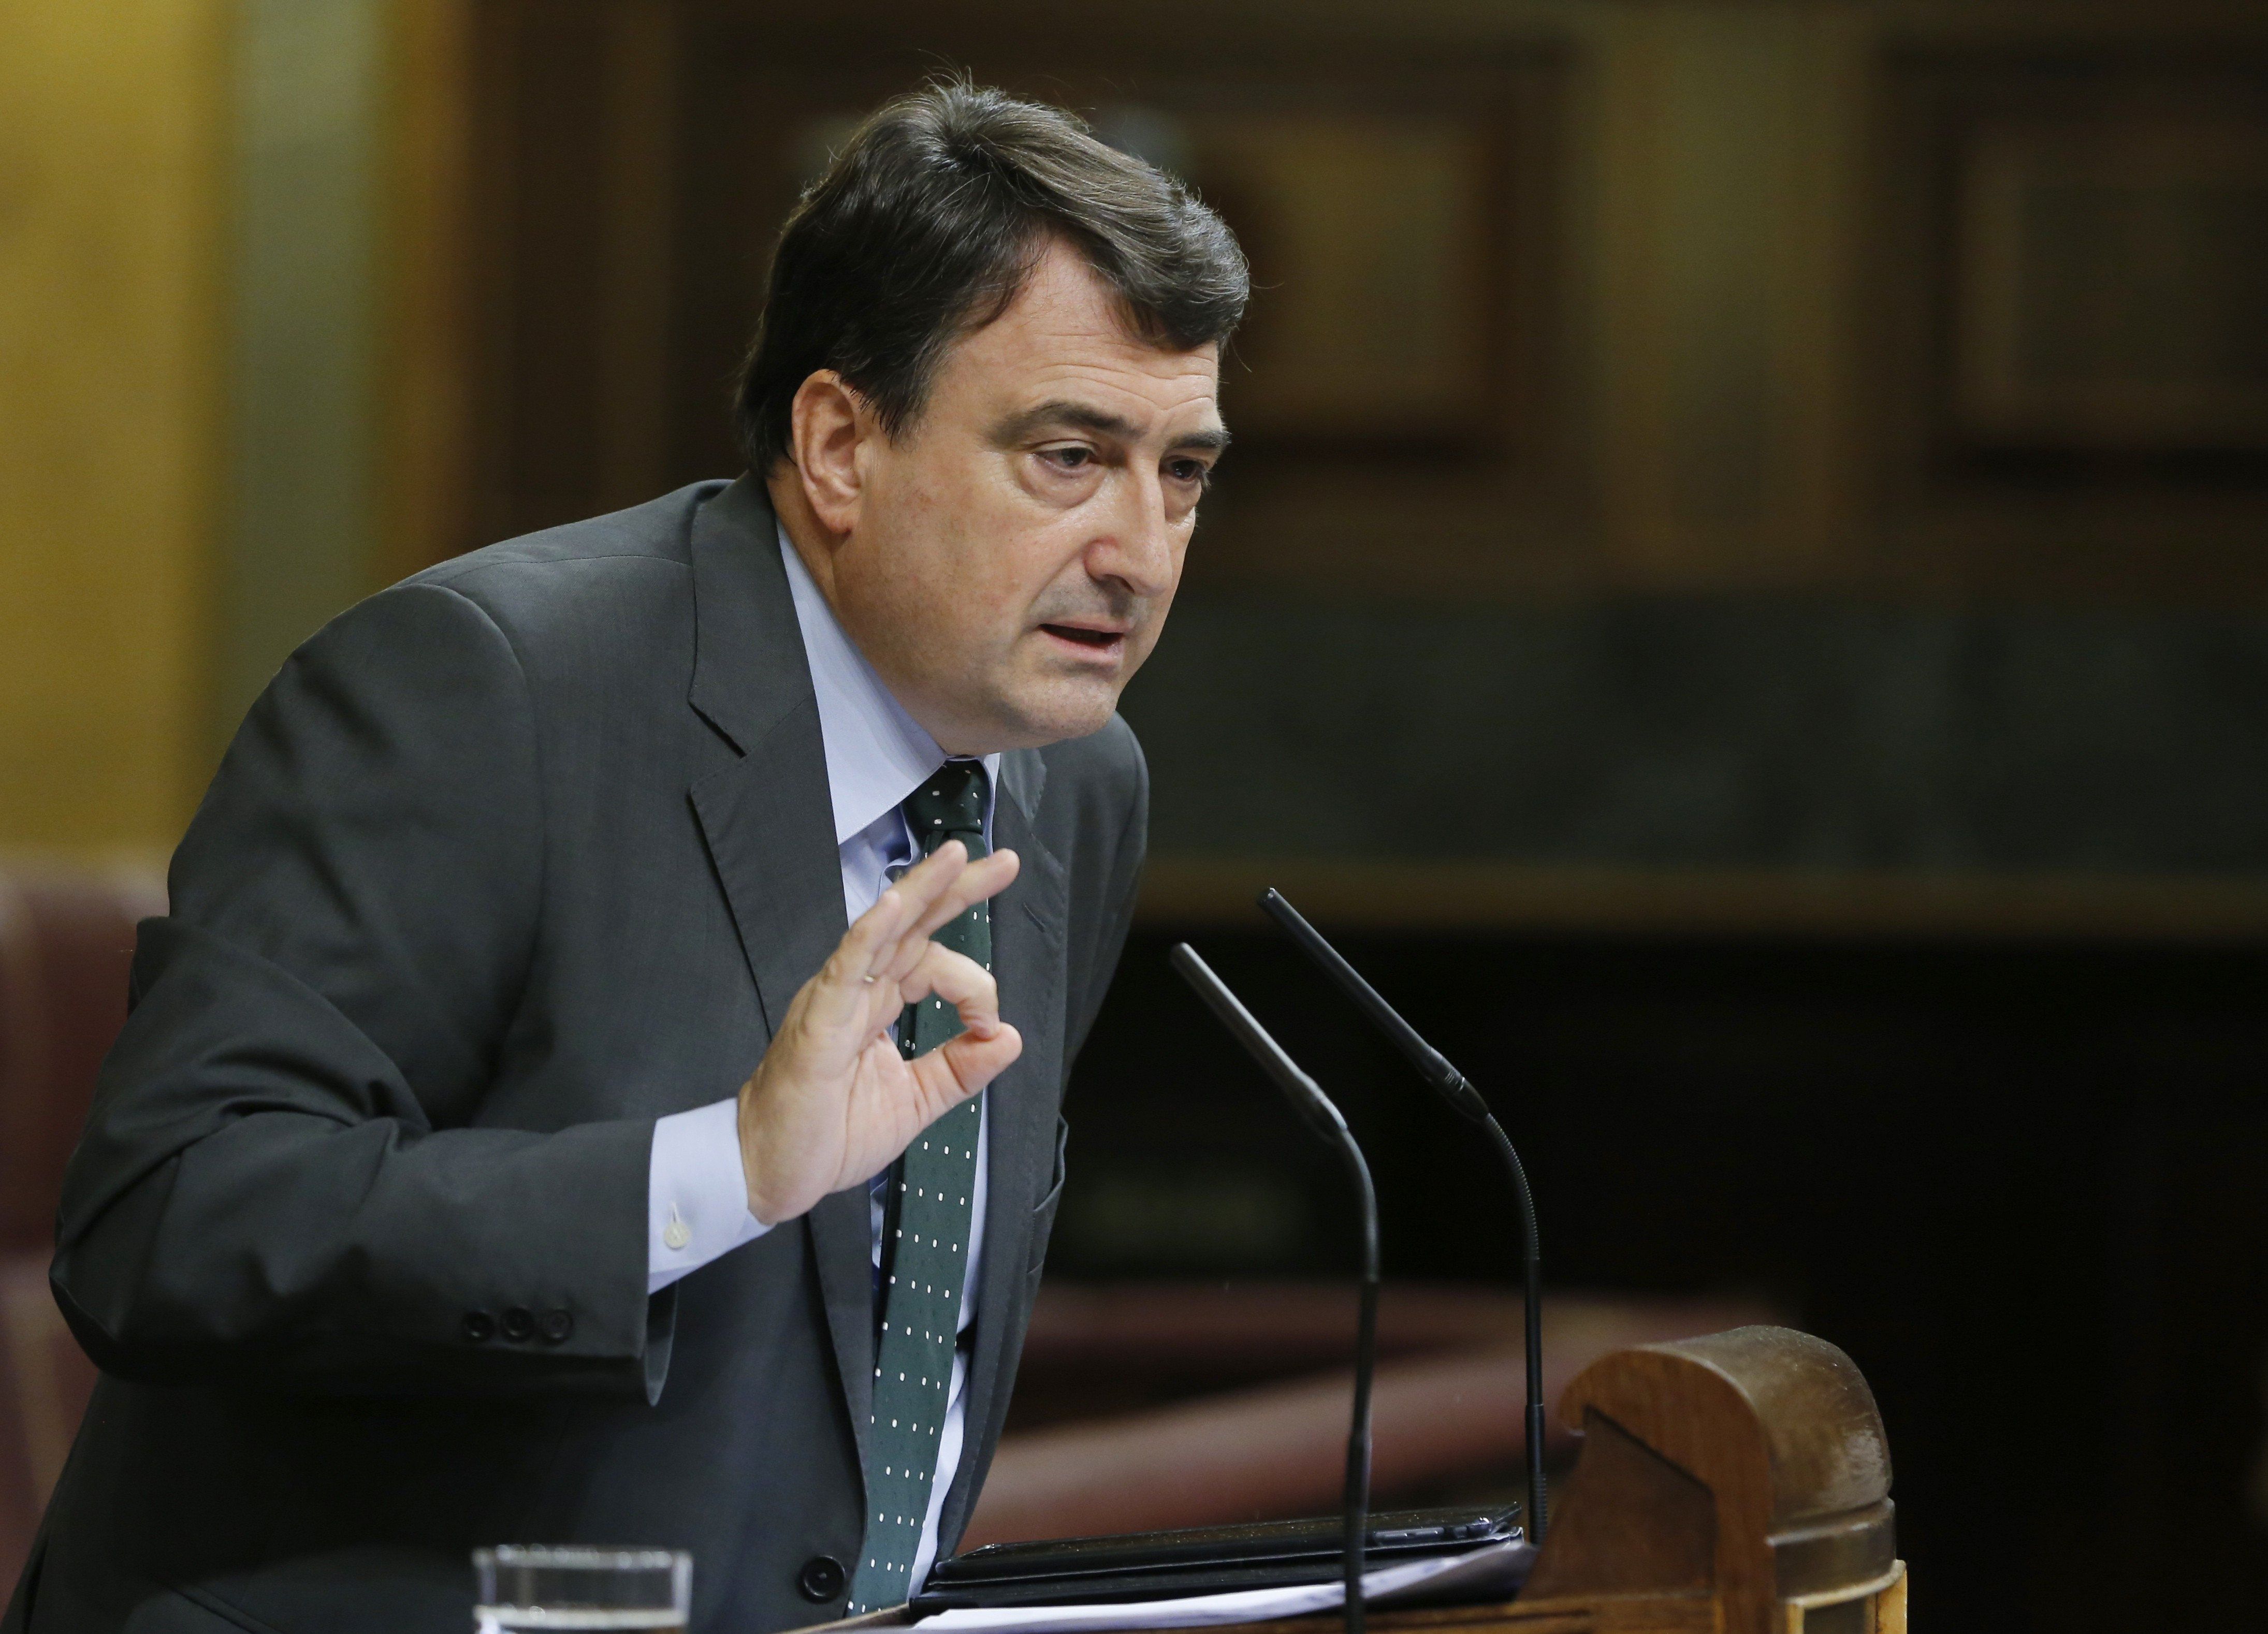 Basque Nationalist Party warns an "exacerbated" reaction in Catalonia puts budgets at risk